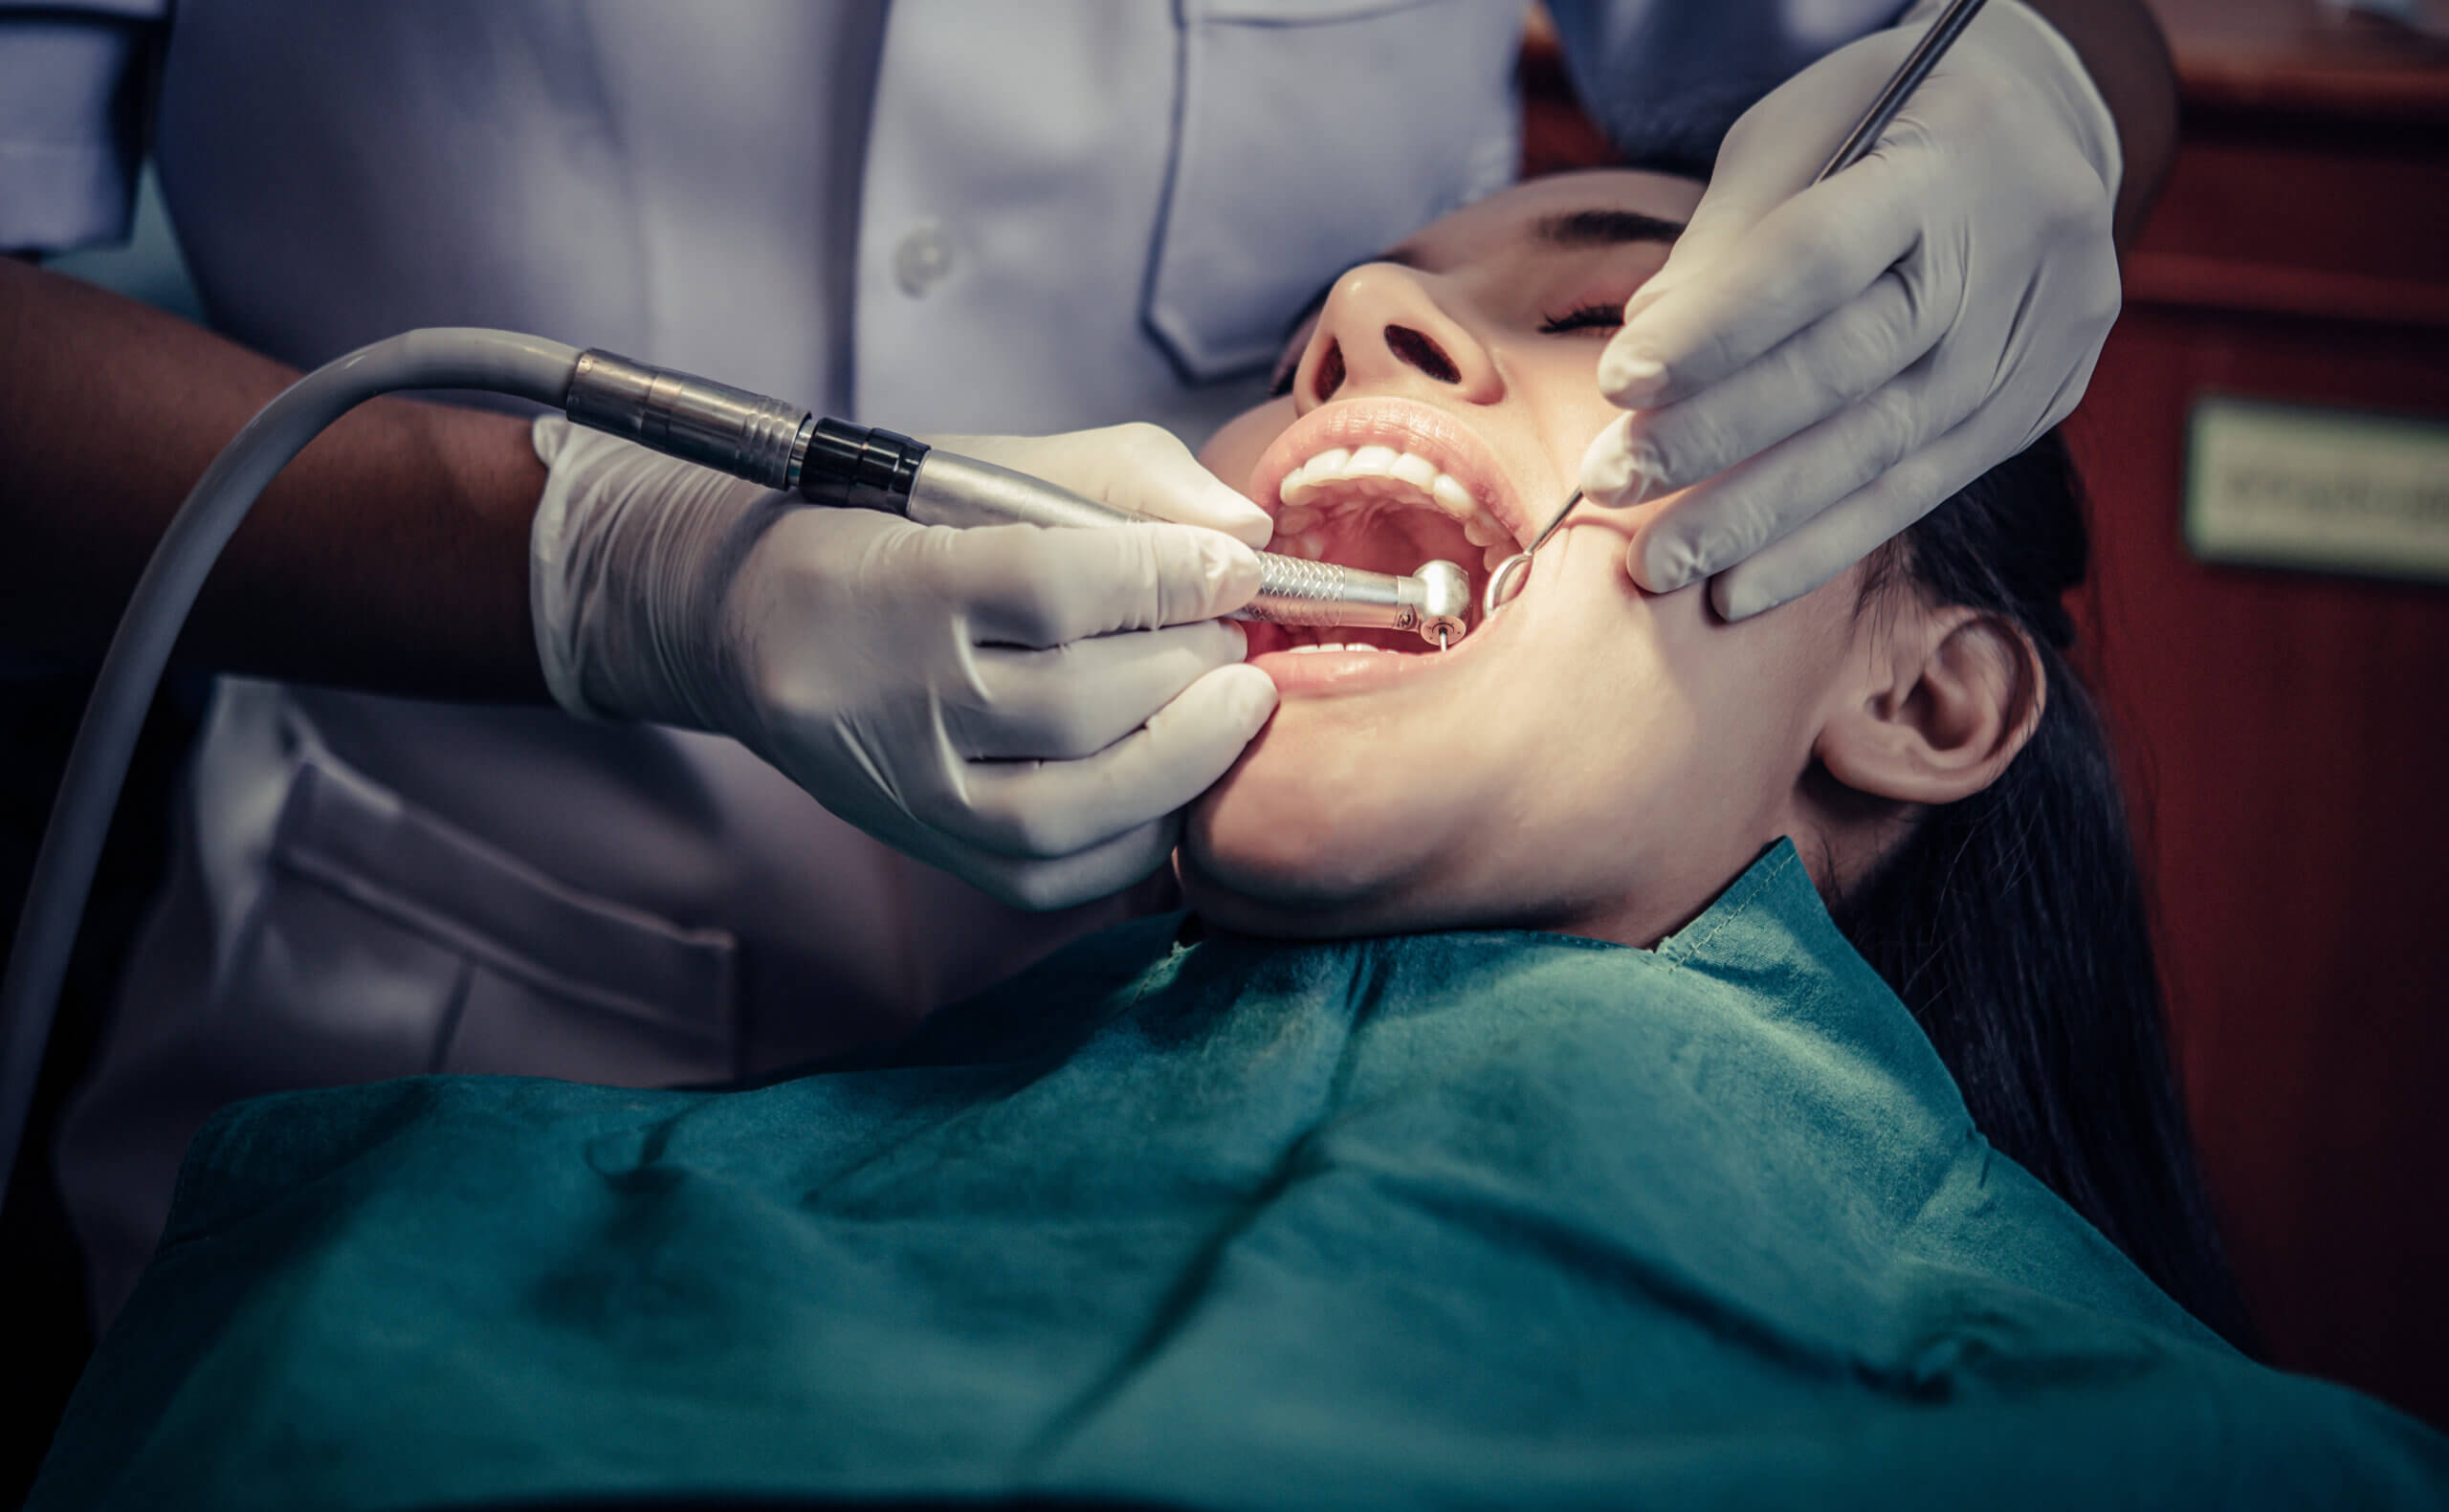 Emergency Tooth Extraction in Shivaji Nagar: What You Need to Know